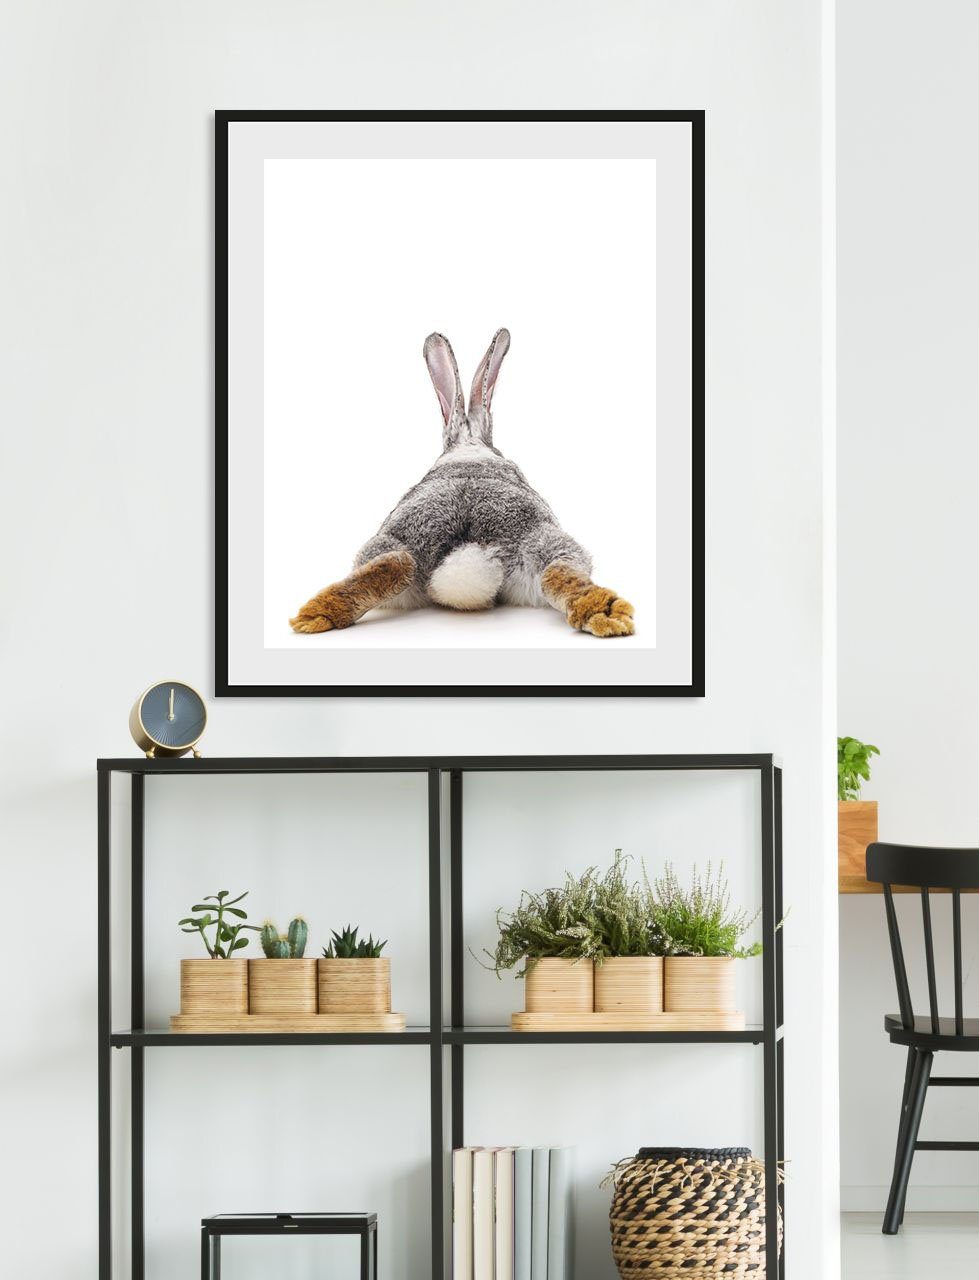 Barzahlung queence Bild Bunny Tail, St) (1 Hase